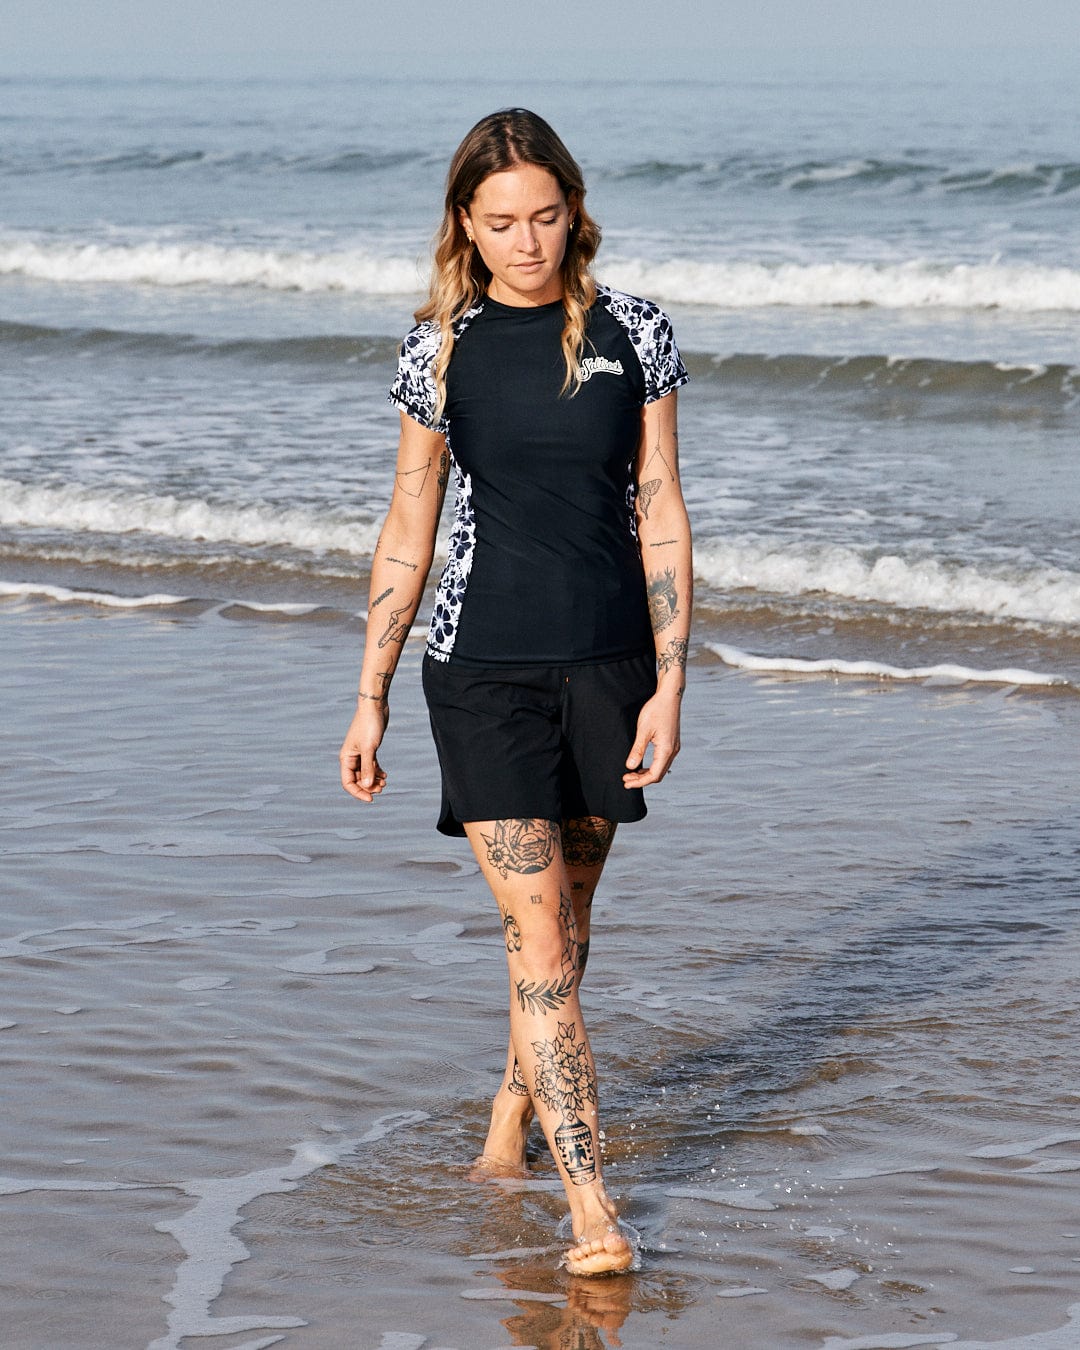 A woman with tattoos walks along the shoreline, wearing a Saltrock Amphibian Womens Boardshort in Black, focused on the water at her feet.